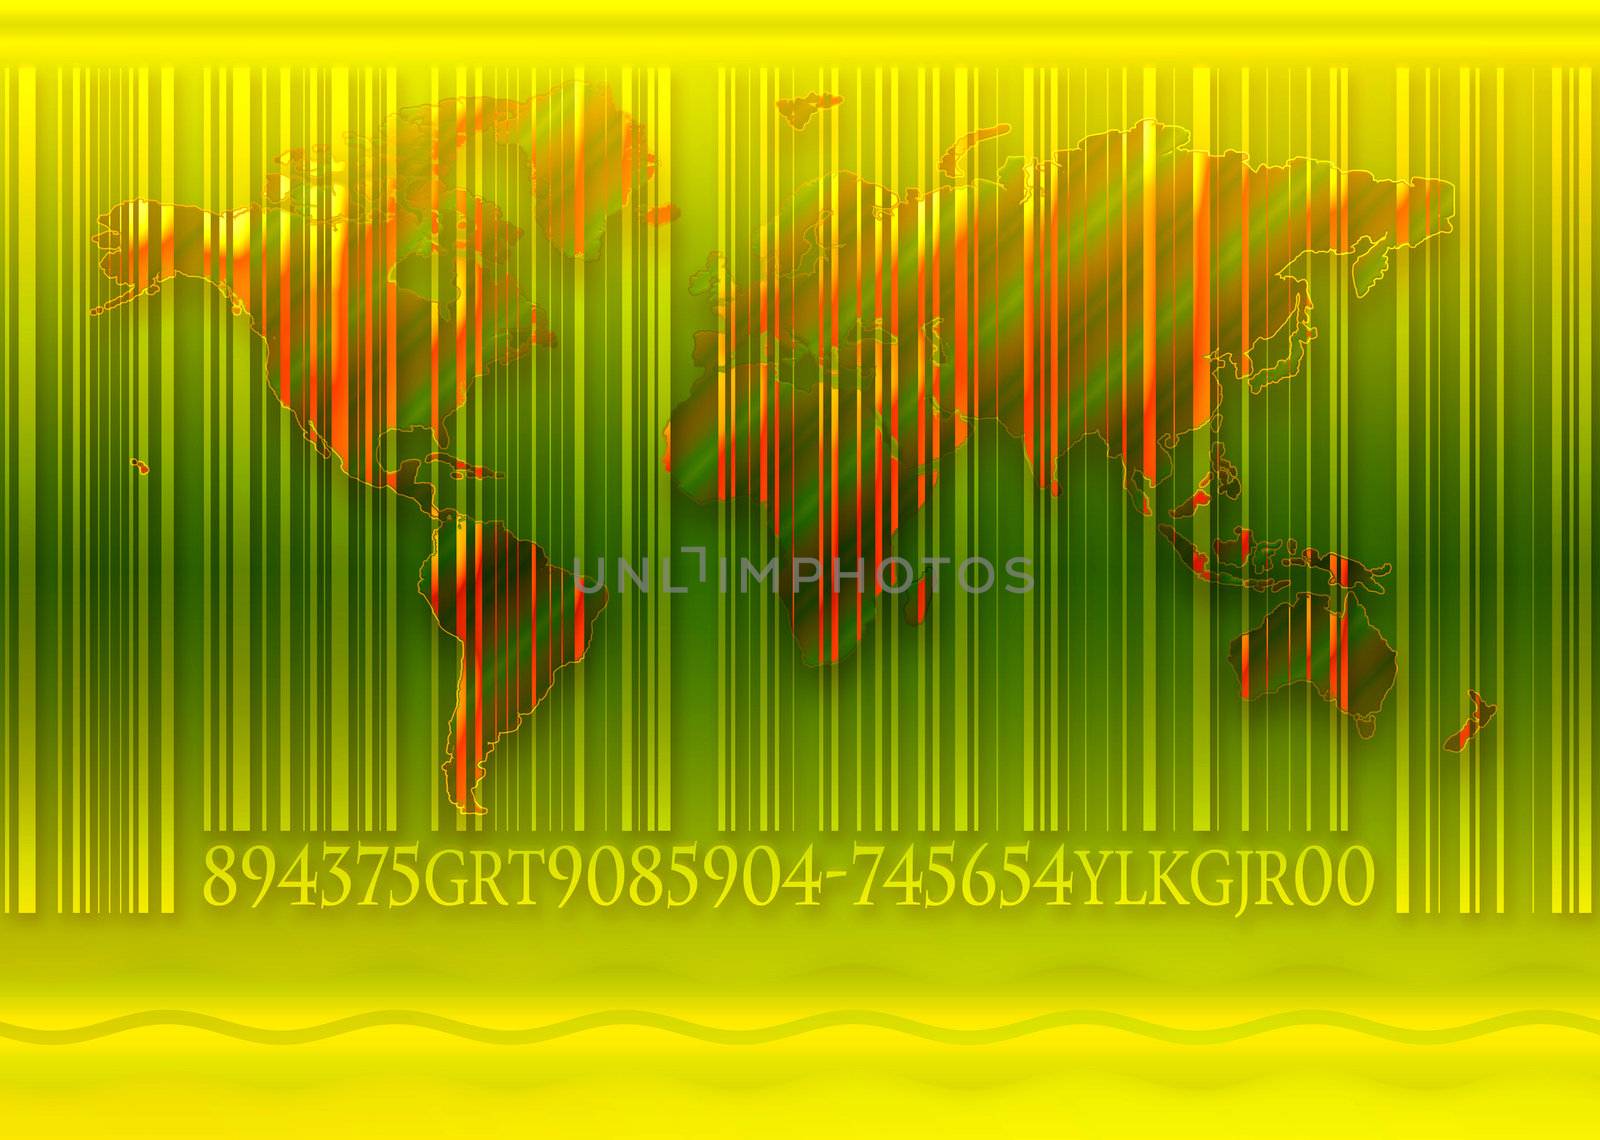 the world with a bar code by richter1910